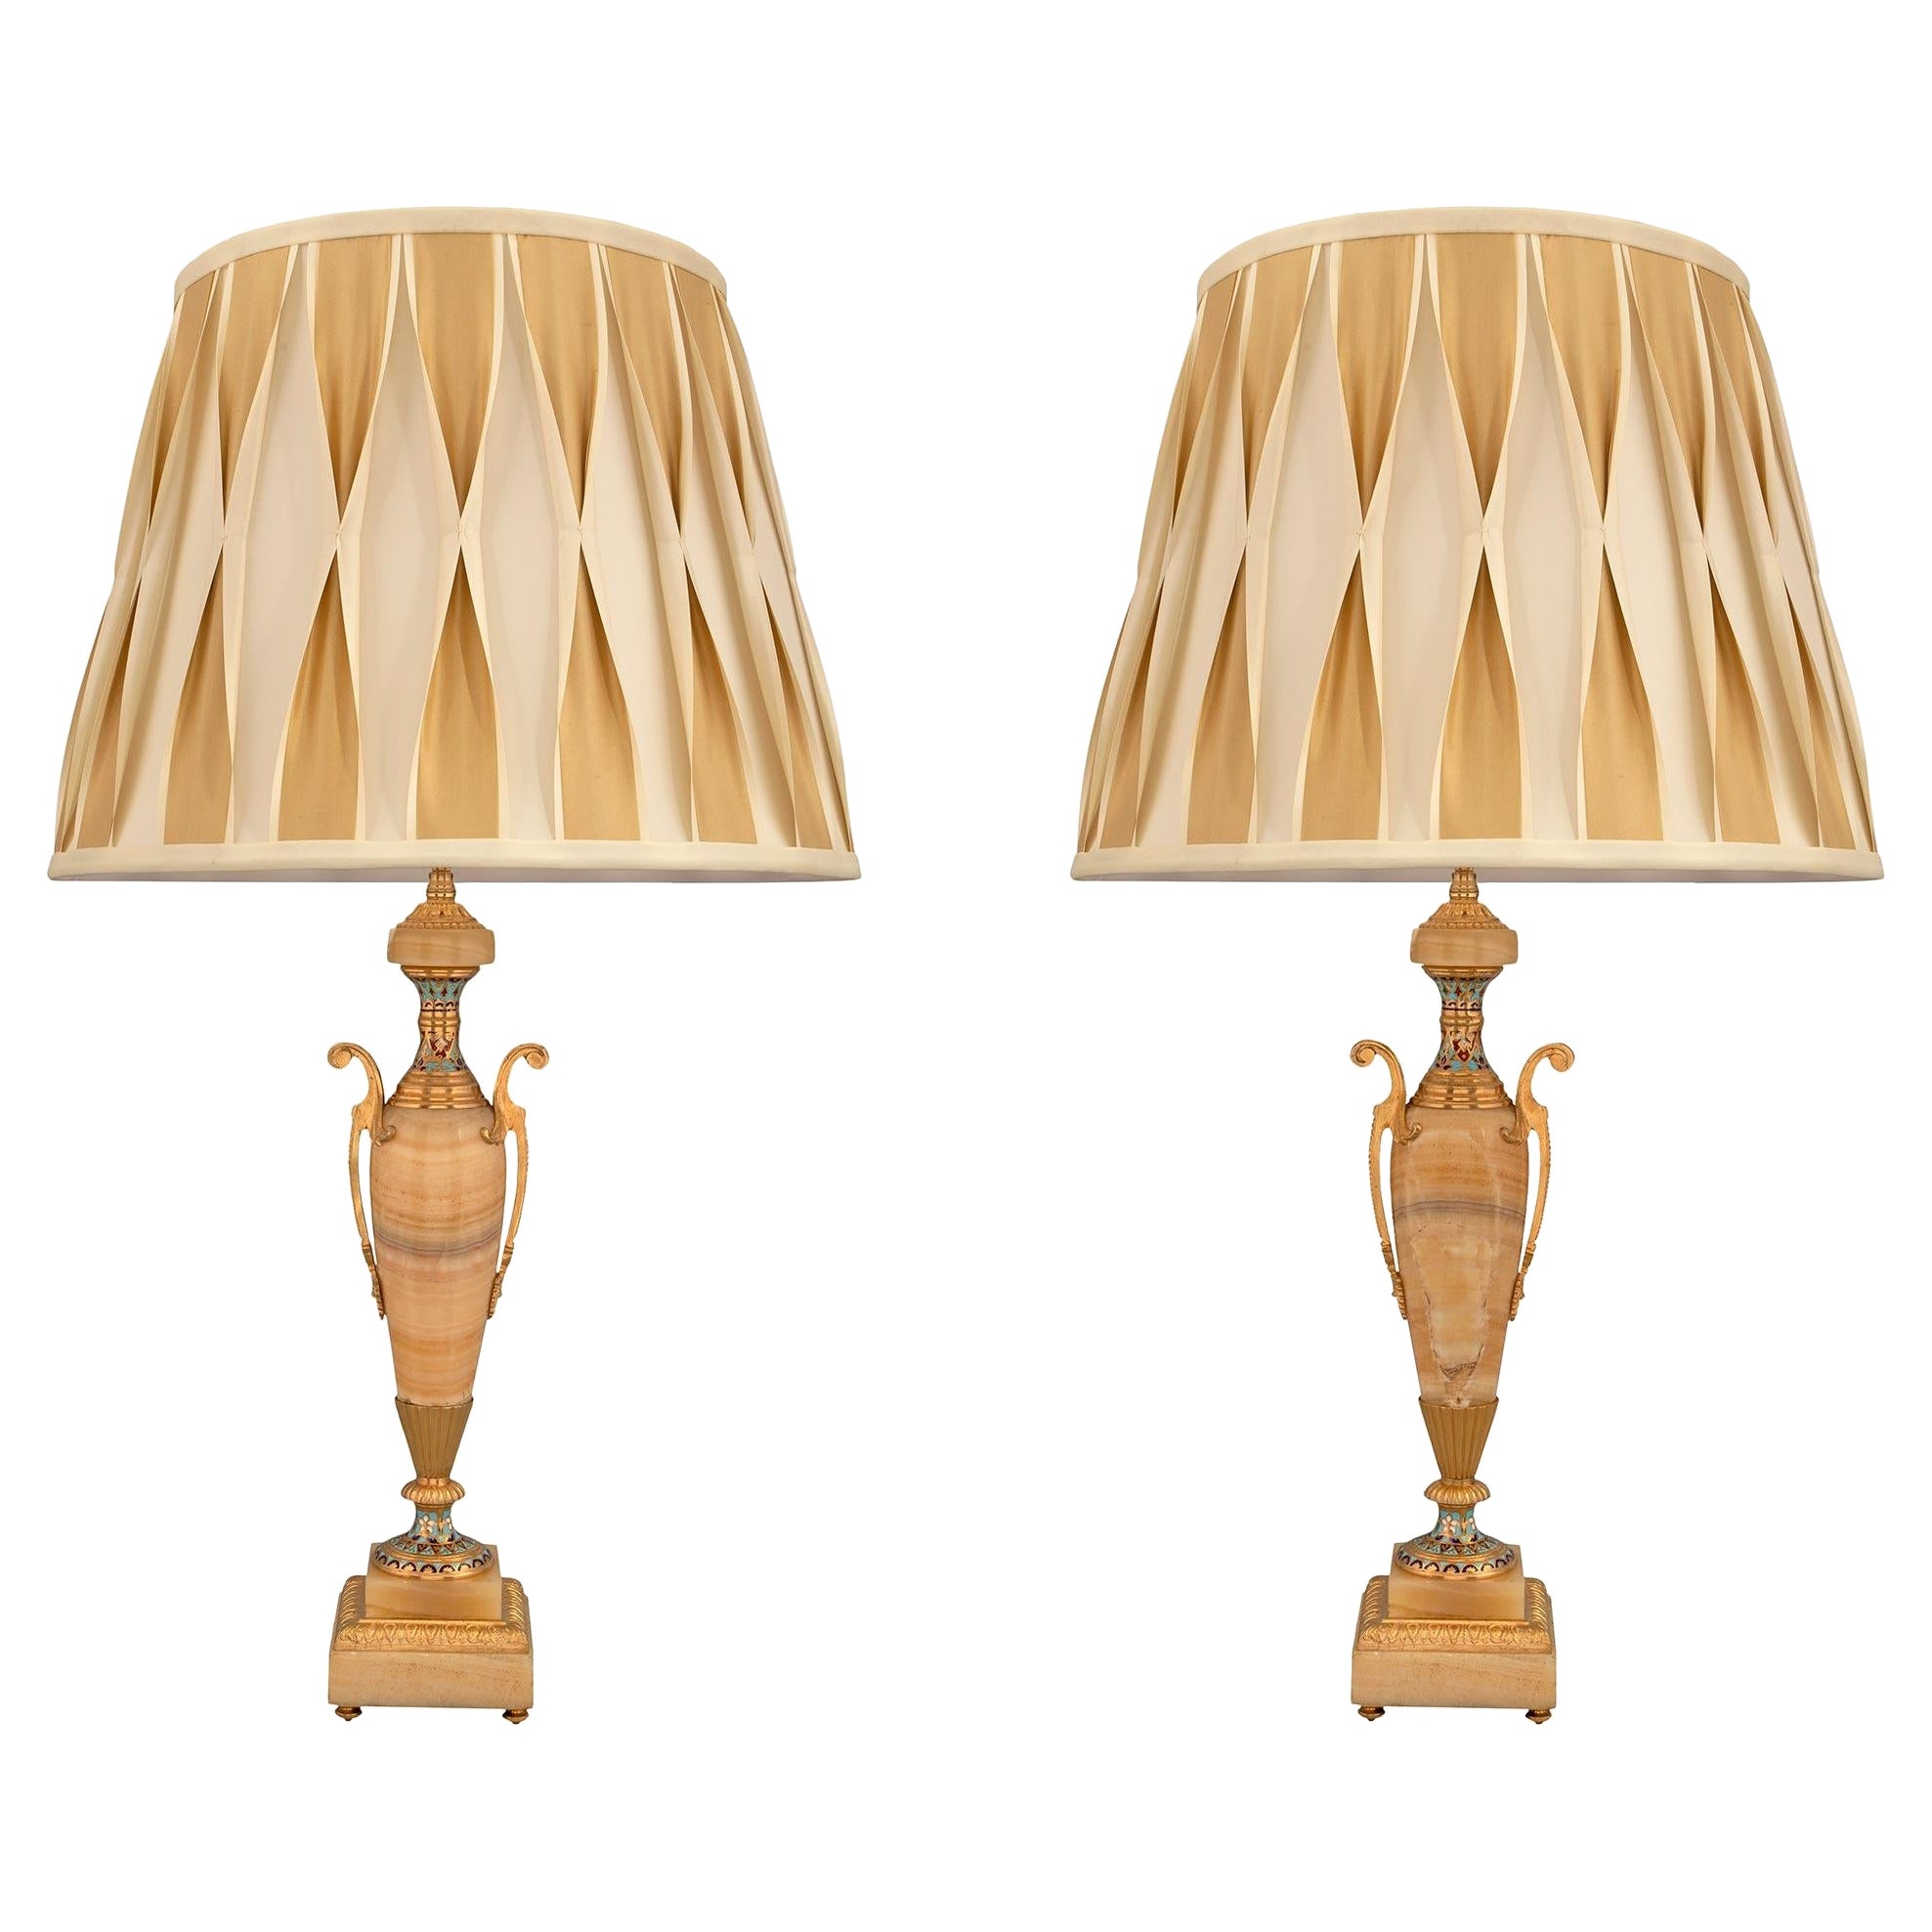 Pair of French 19th Century Neo-Classical Onyx, Ormolu and Cloisonné Lamps For Sale